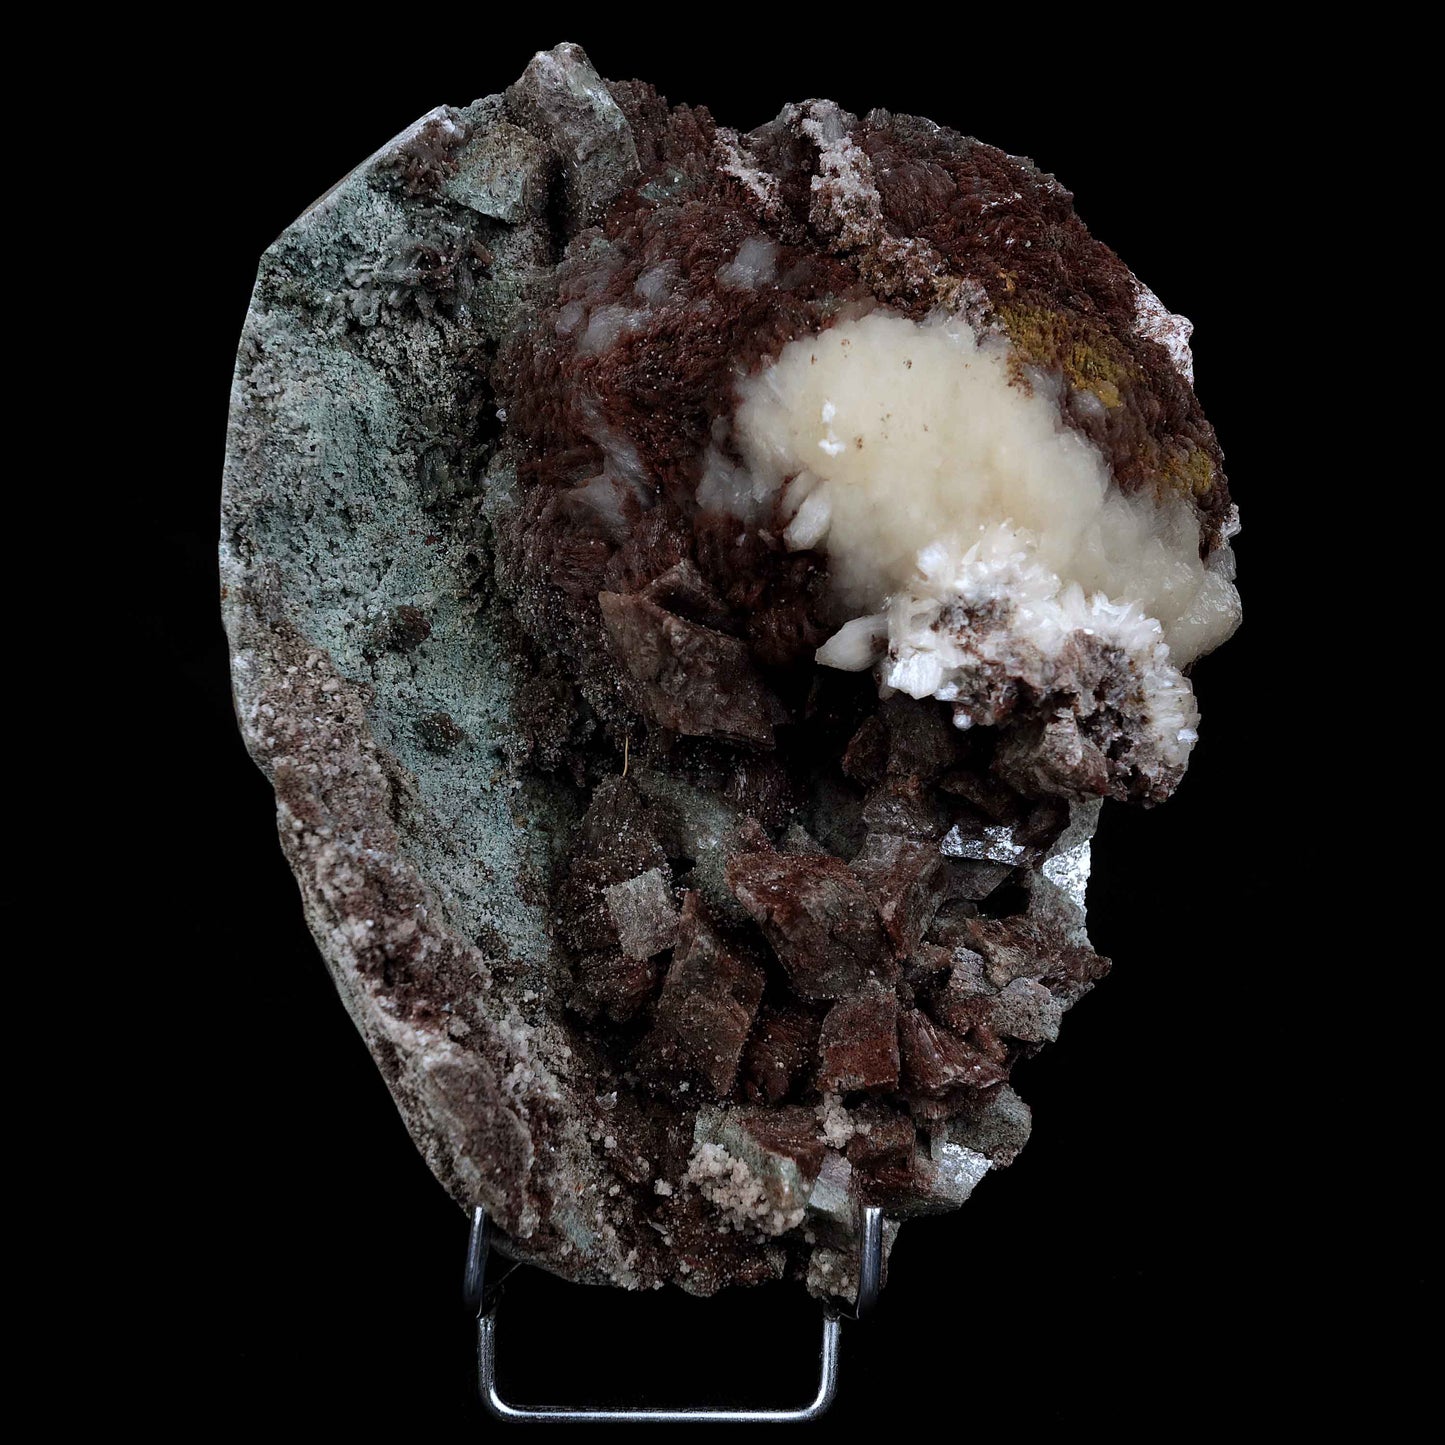 Stilbite Fuse with Marshy Green Heulandite Natural Mineral Specimen #…  https://www.superbminerals.us/products/stilbite-fuse-with-marshy-green-heulandite-natural-mineral-specimen-b-4653  Features: It has become a standard to include Heulandite in a Chalcedony collection, and this tiny crystal is extremely attractive in and of itself. The specimen is dominated by a large number of dazzling crystals with outstanding luster, good translucence, and a pleasant sea-green hue. Stilbite